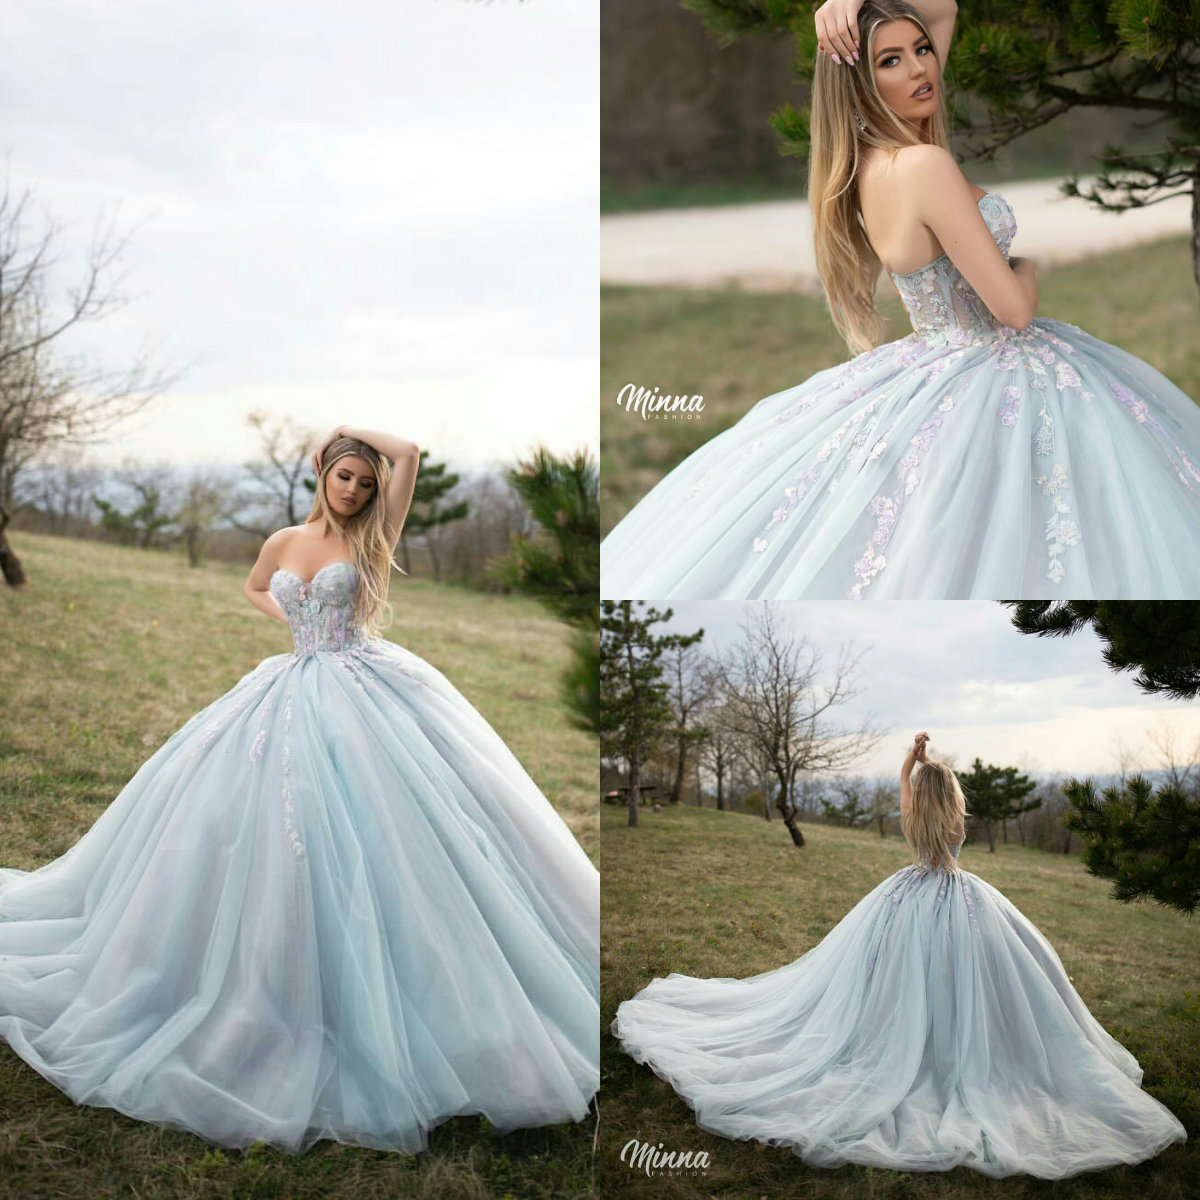 

2019 Ball Gown Prom Dresses Sweetheart Lace Appliqued Sweep Train Gorgeous Evening Gowns Tulle Formal Party Dress Wear Quinceanera Dress, Light sky blue